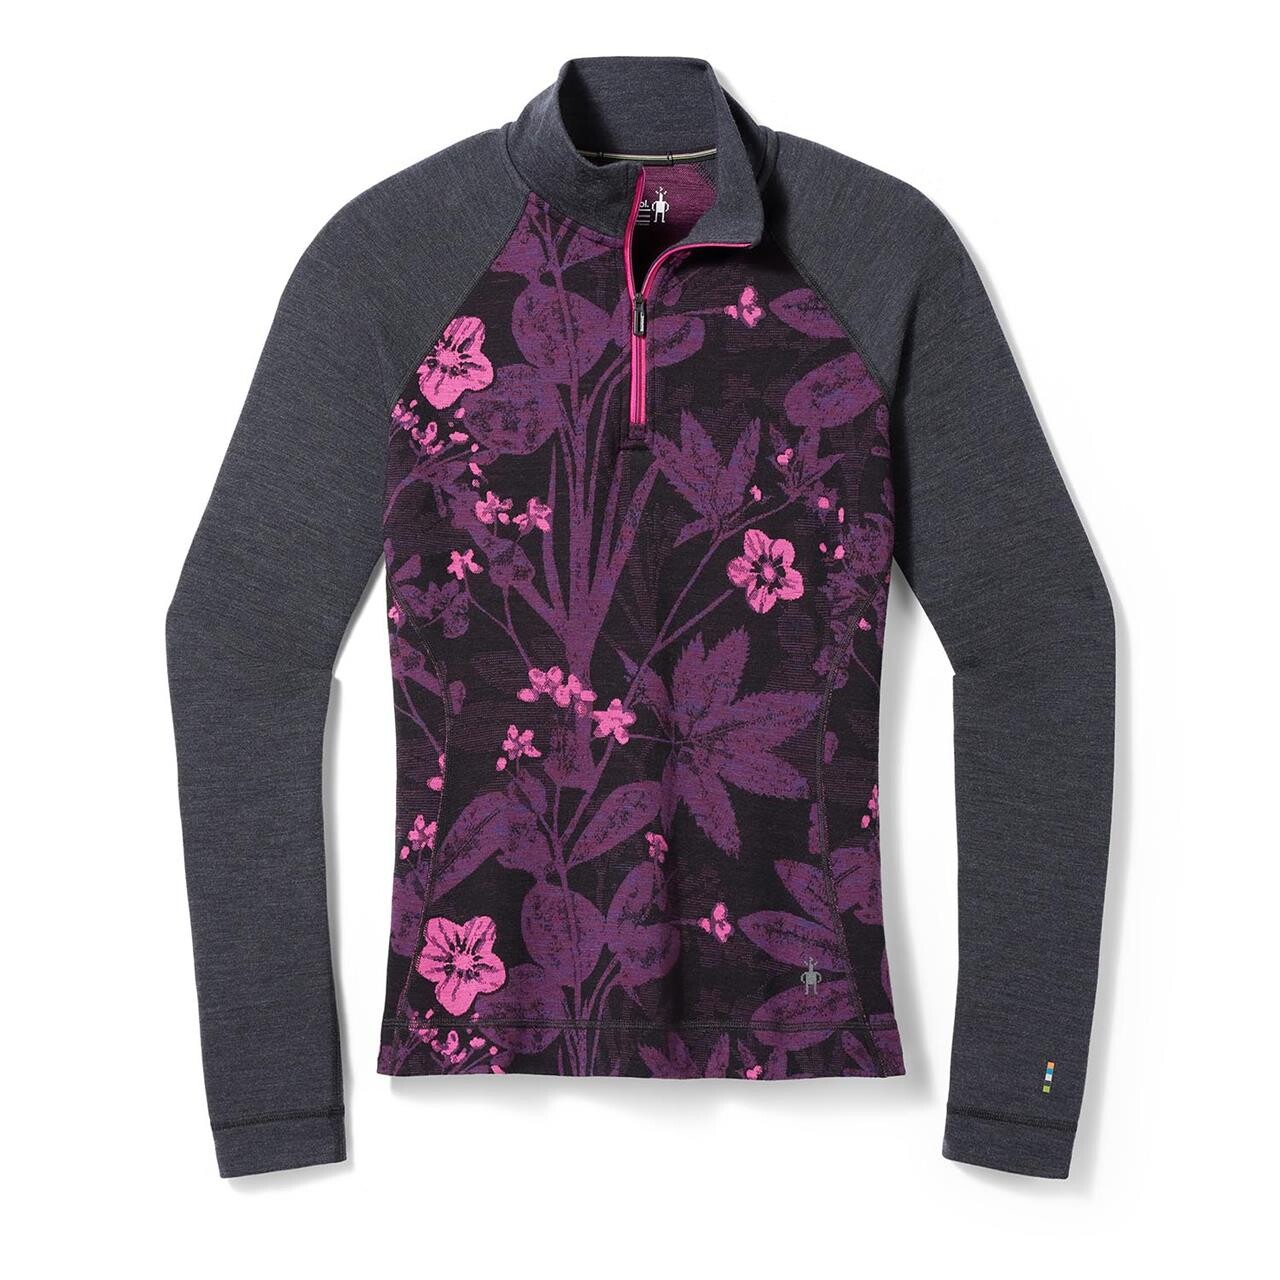 Billede af Smartwool Womens Cl Thermal Merino Base Layer 1/4 Zip (Lilla (PURPLE IRIS FLORAL) Small)